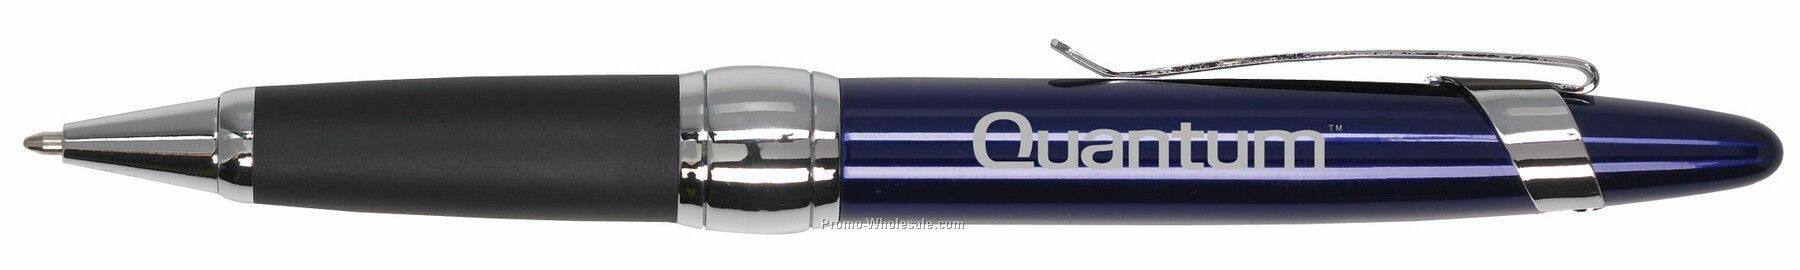 Madrid Twist Action Pen With Brass Barrel